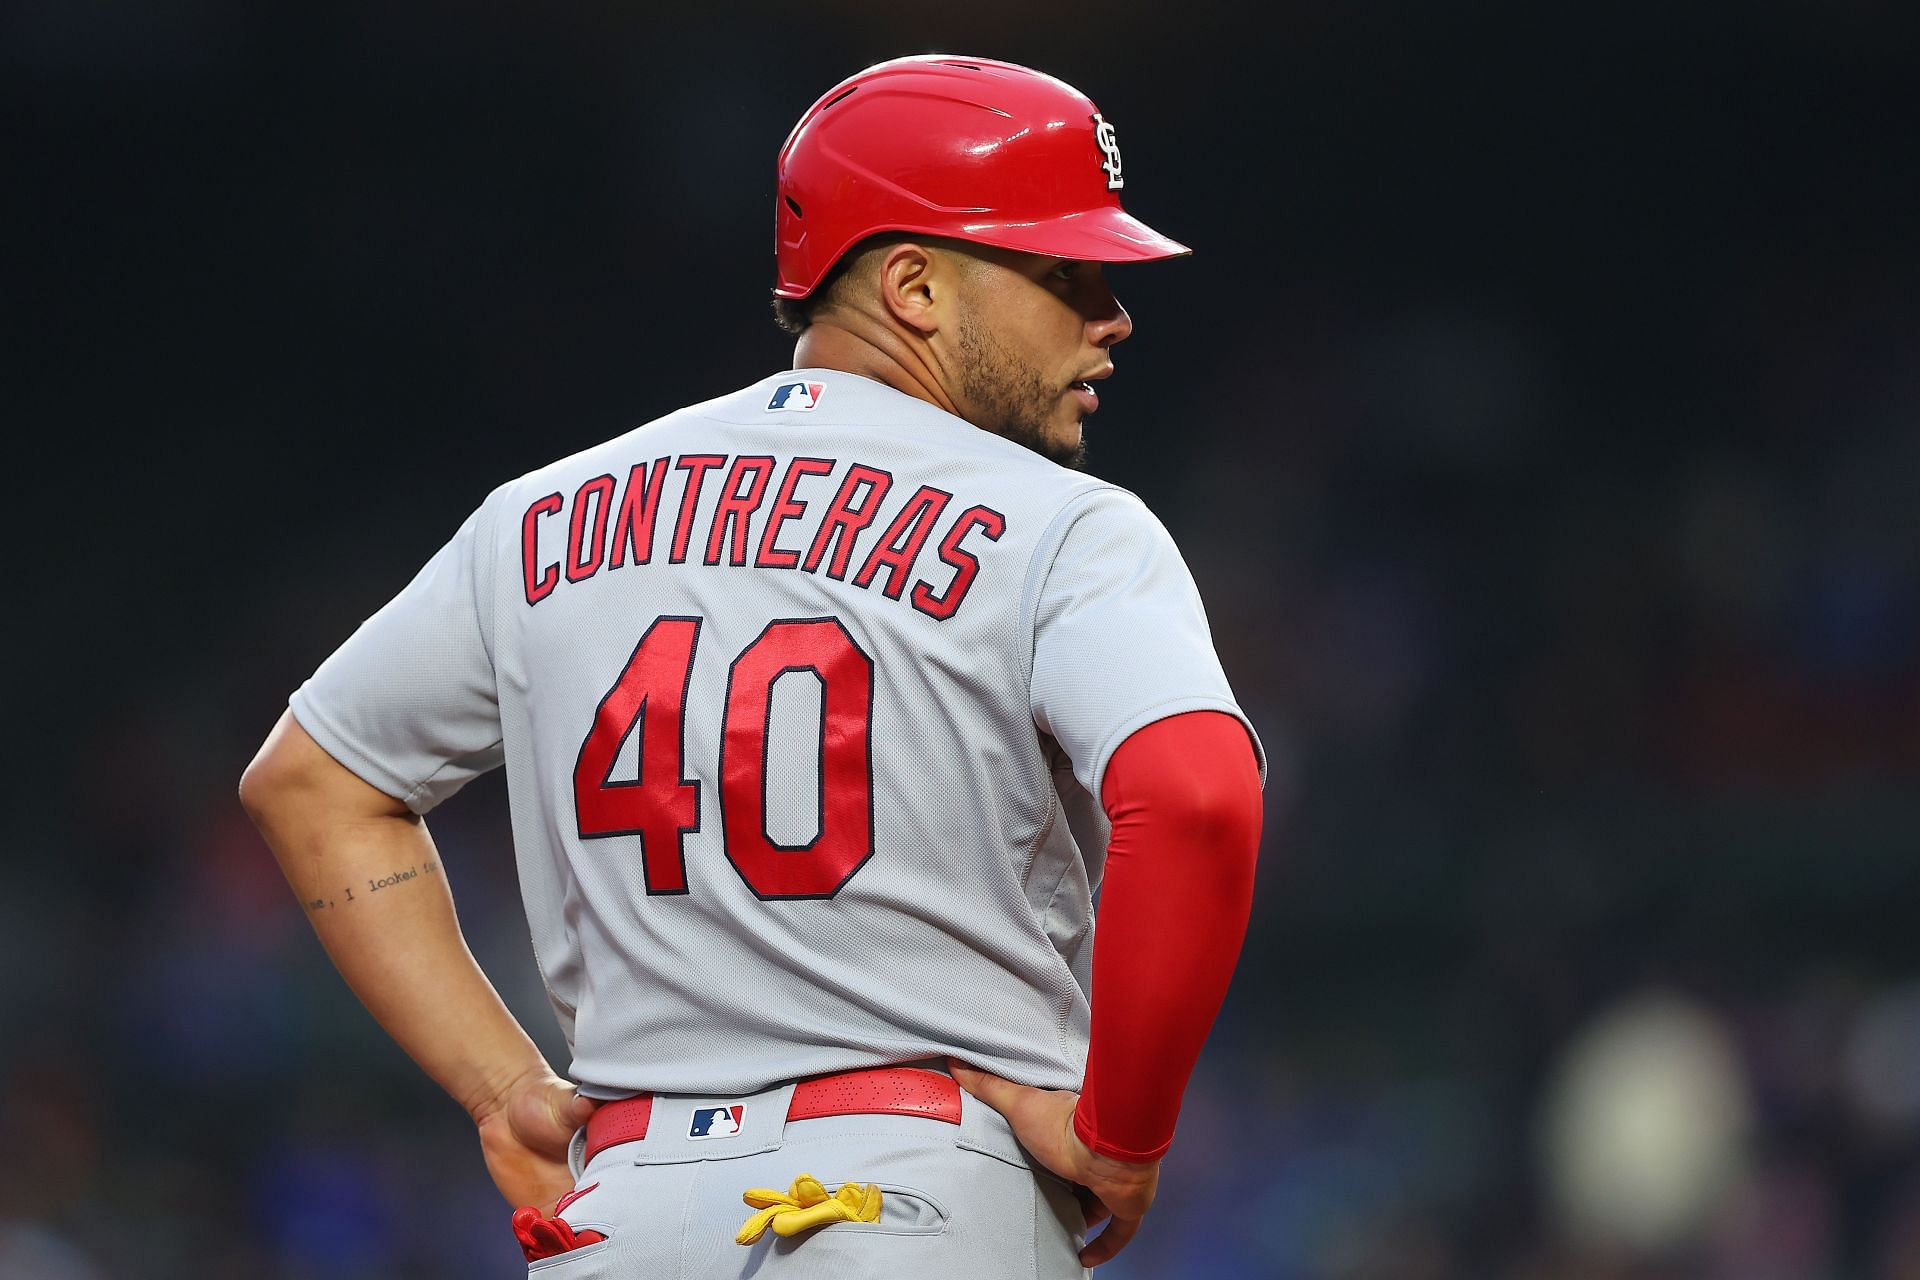 Contreras not in lineup, but doing OK after catching fastball with wrist